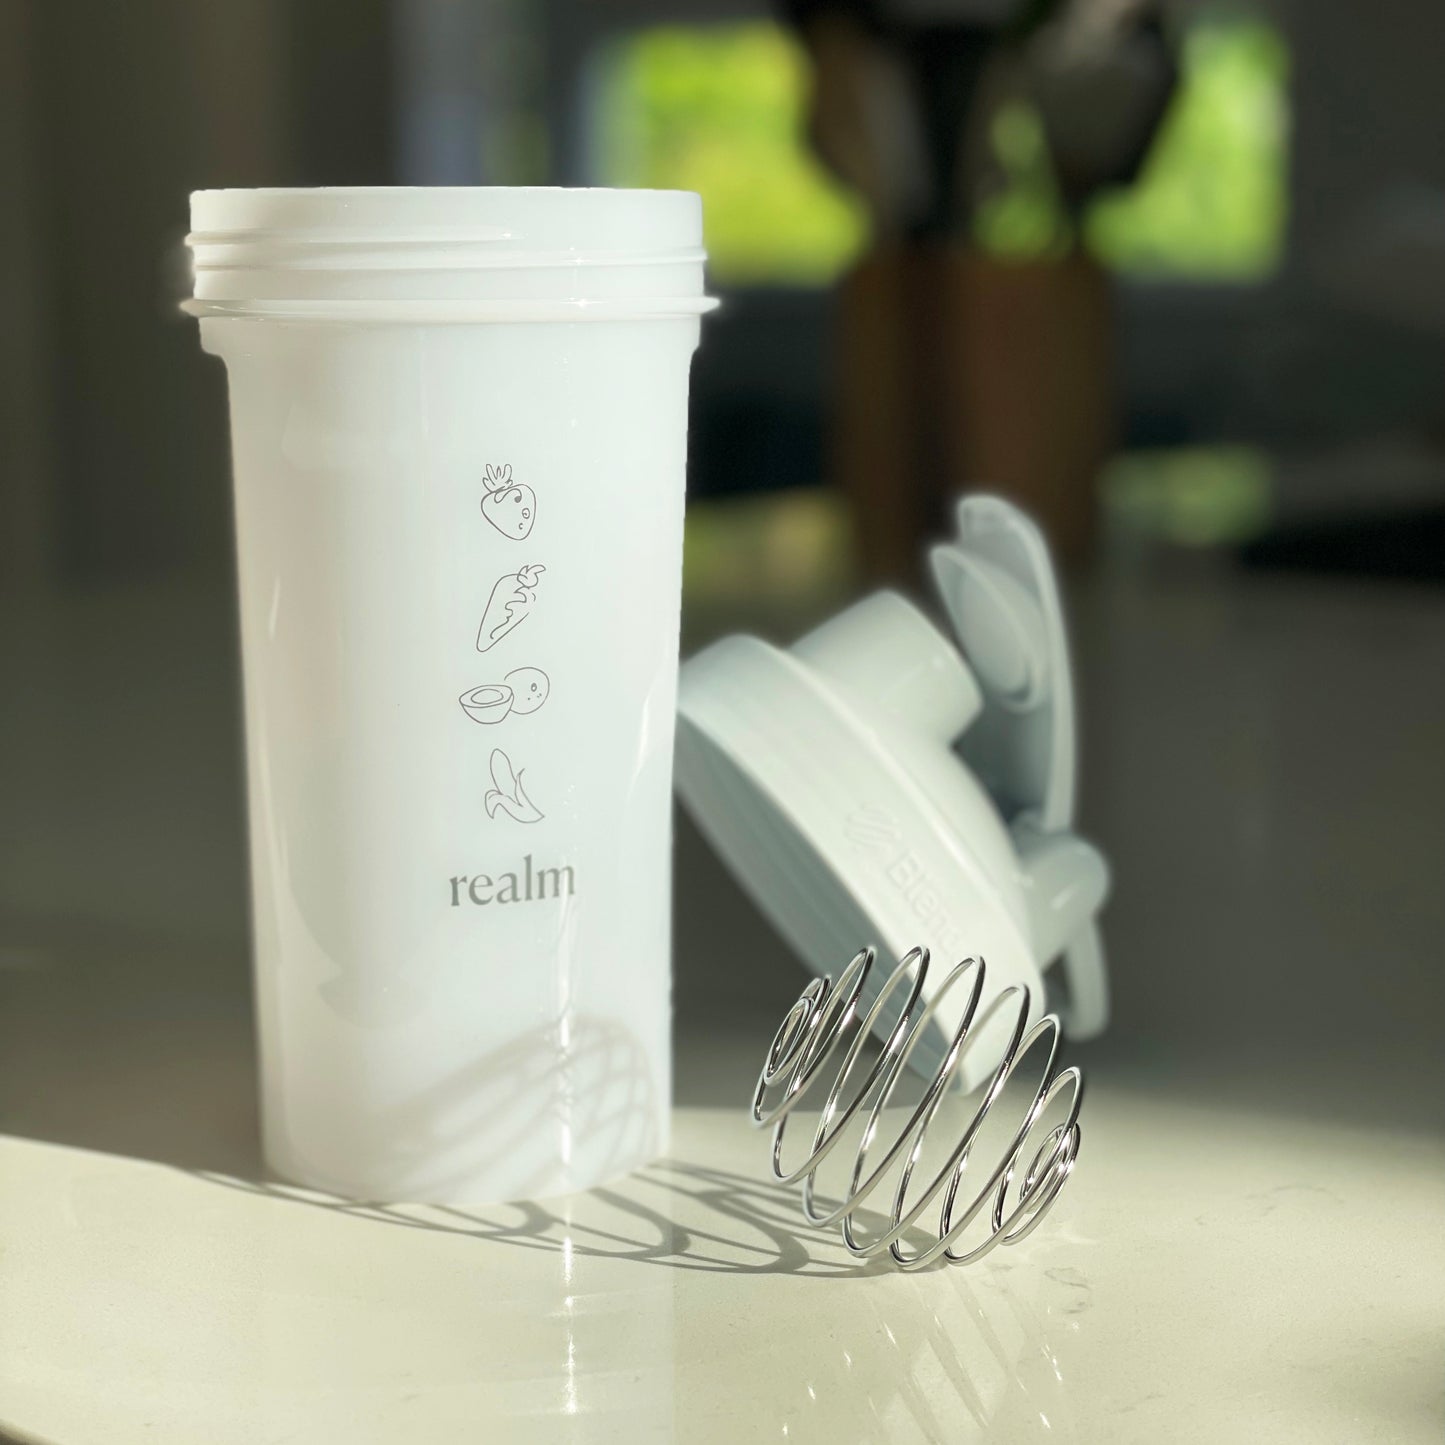 Realm | Products | Realm Shaker - Fruity Limited Edition